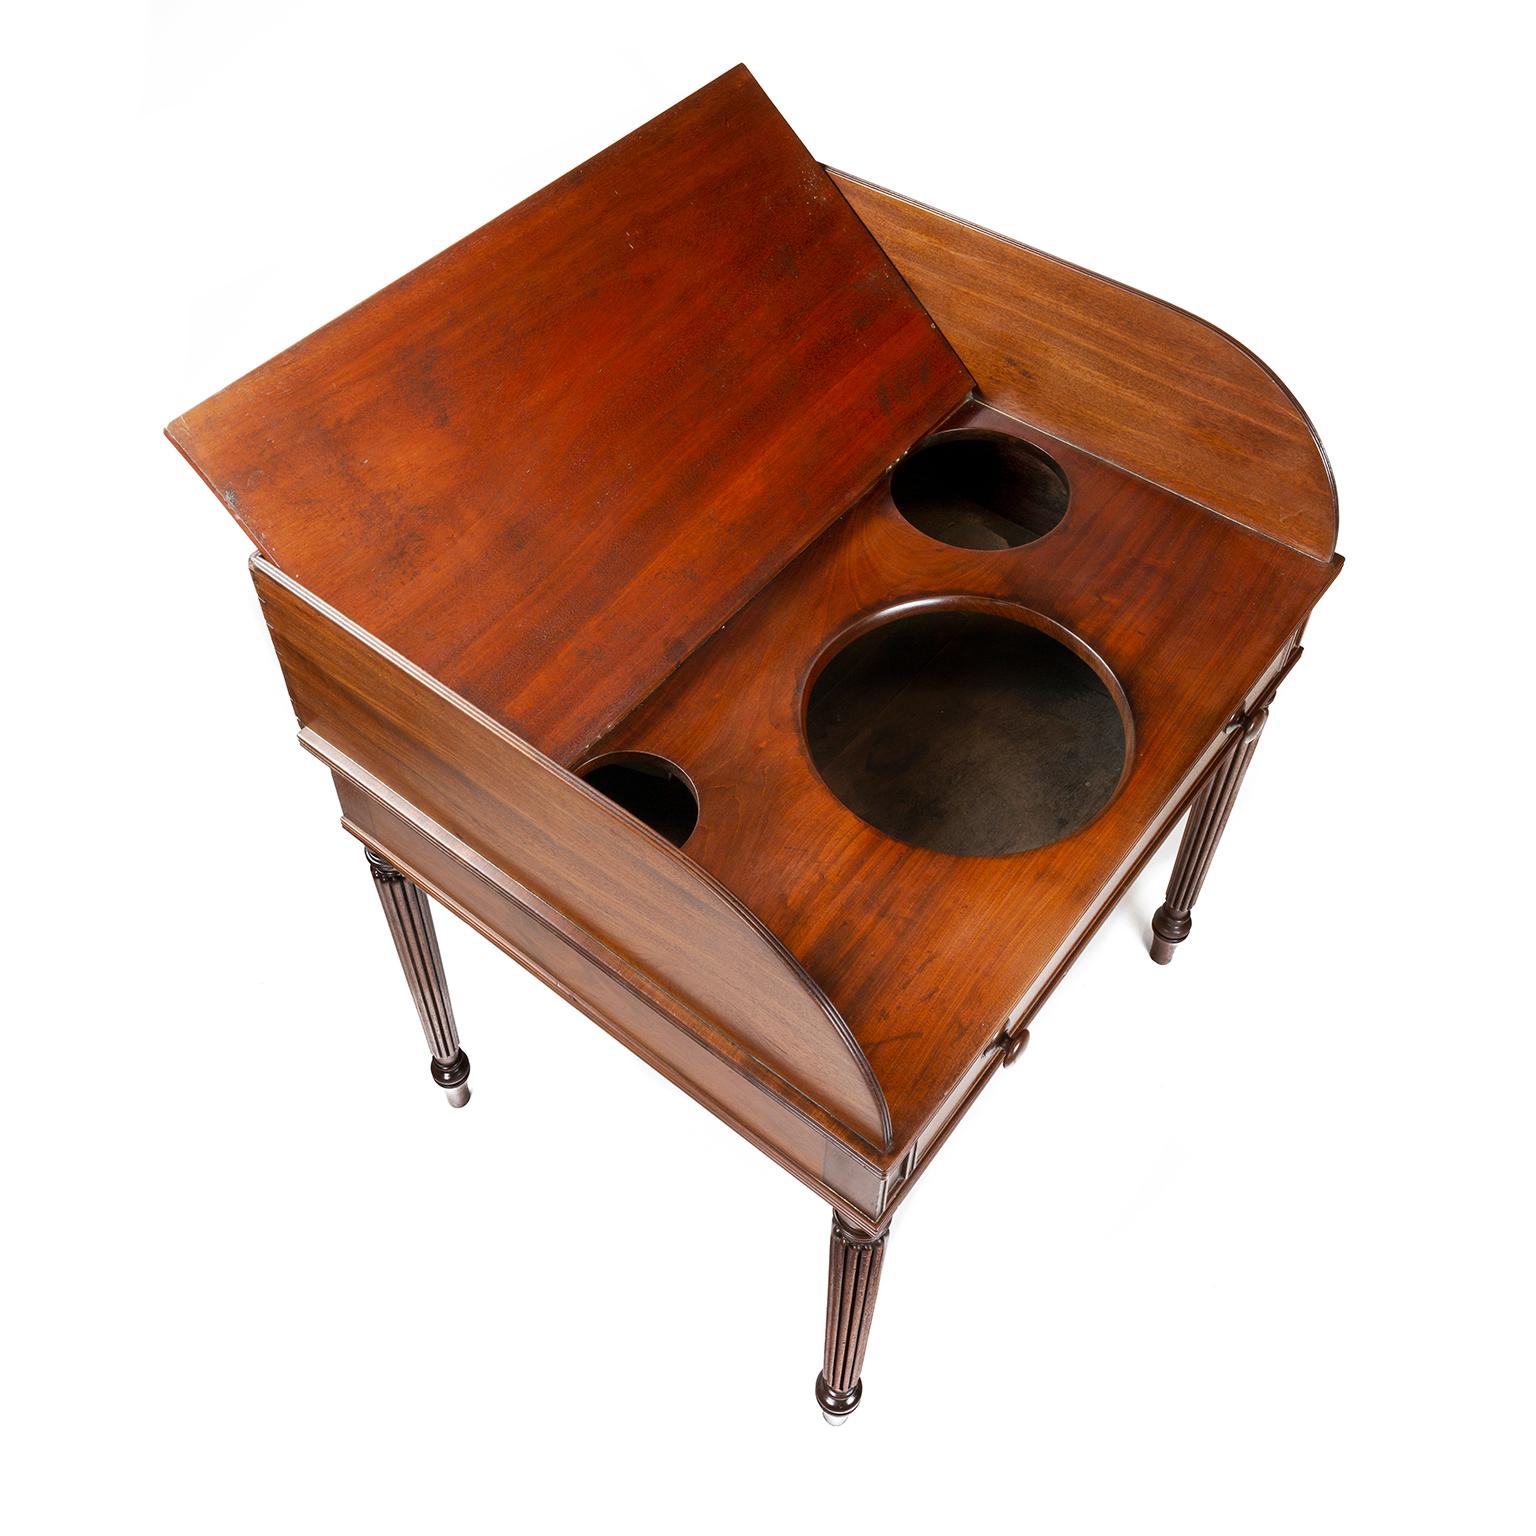 Regency Gillows wash stand / writing table in Mahogany 9